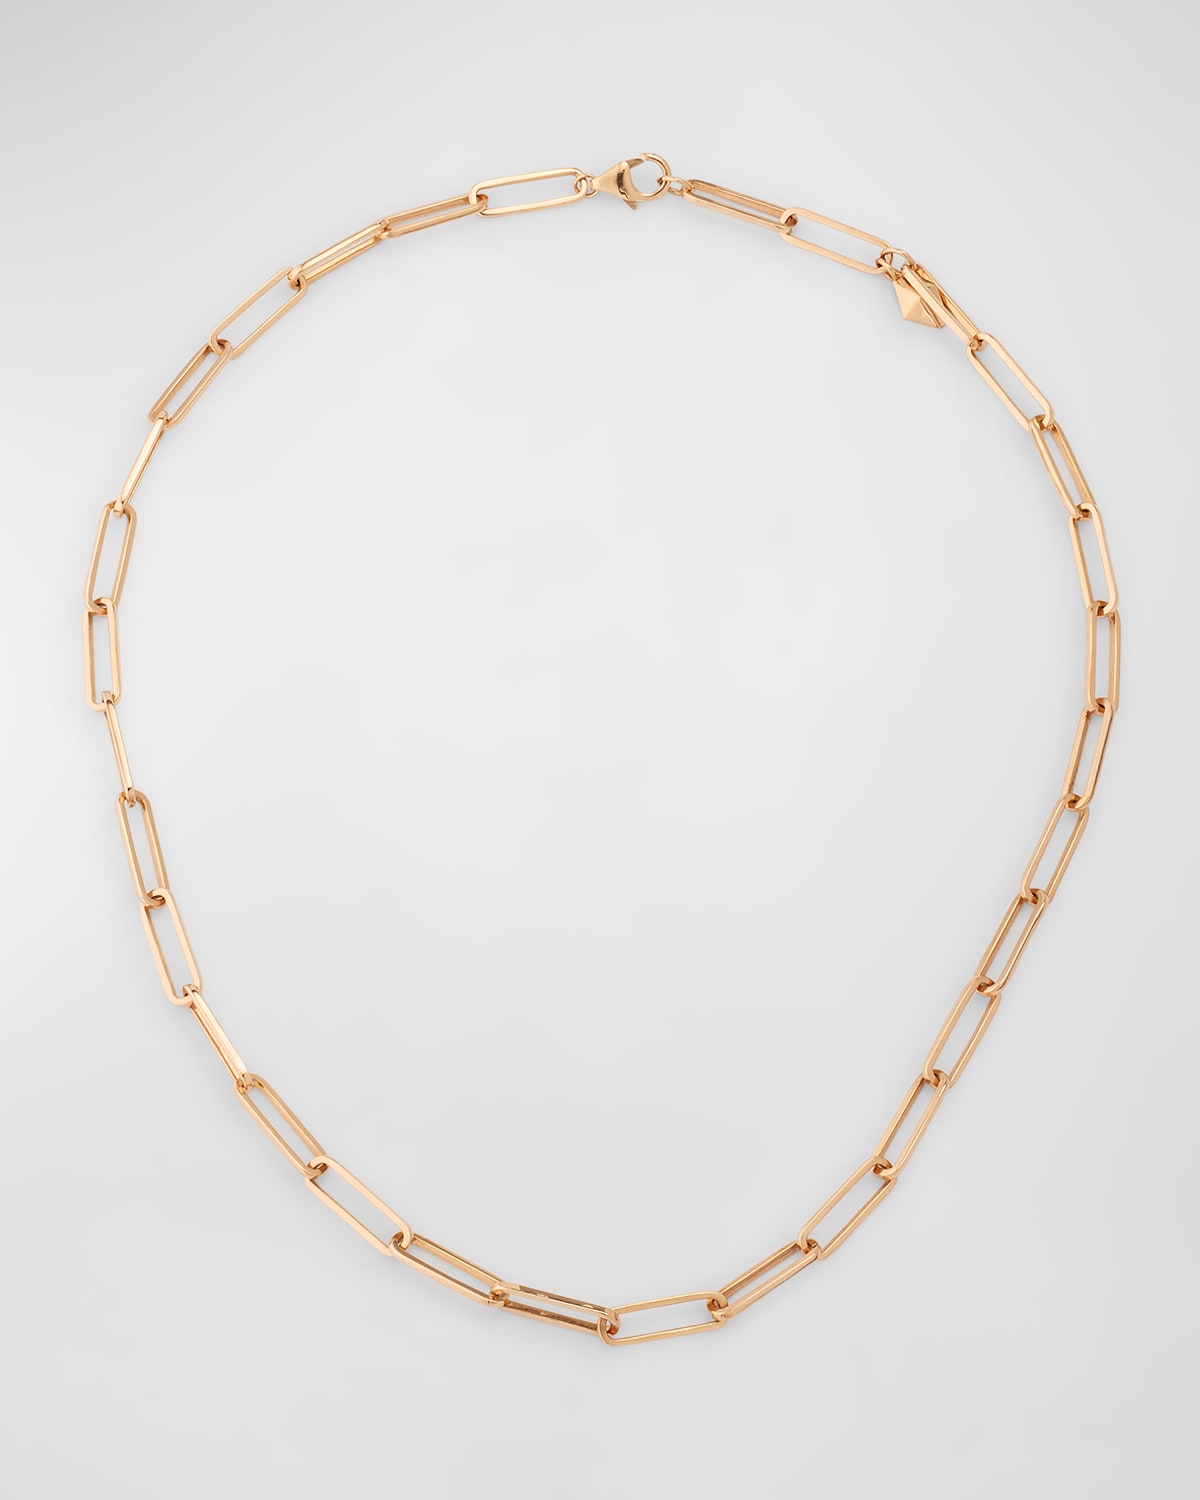 Walters Faith Rose Gold Large Elongated Chain Necklace, 16"l